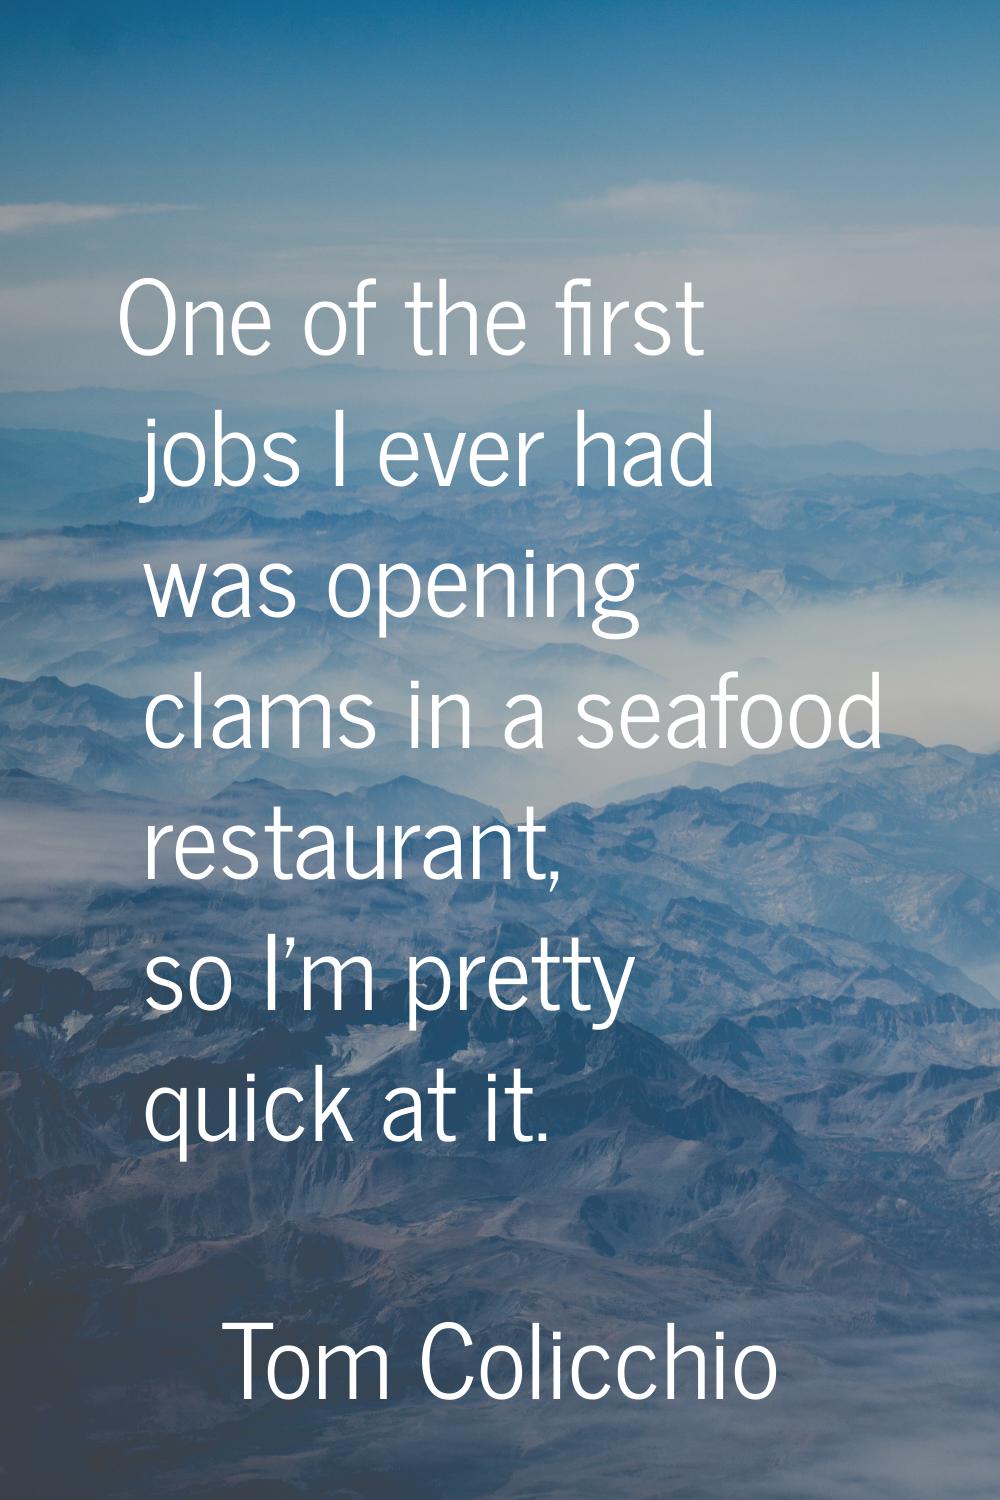 One of the first jobs I ever had was opening clams in a seafood restaurant, so I'm pretty quick at 